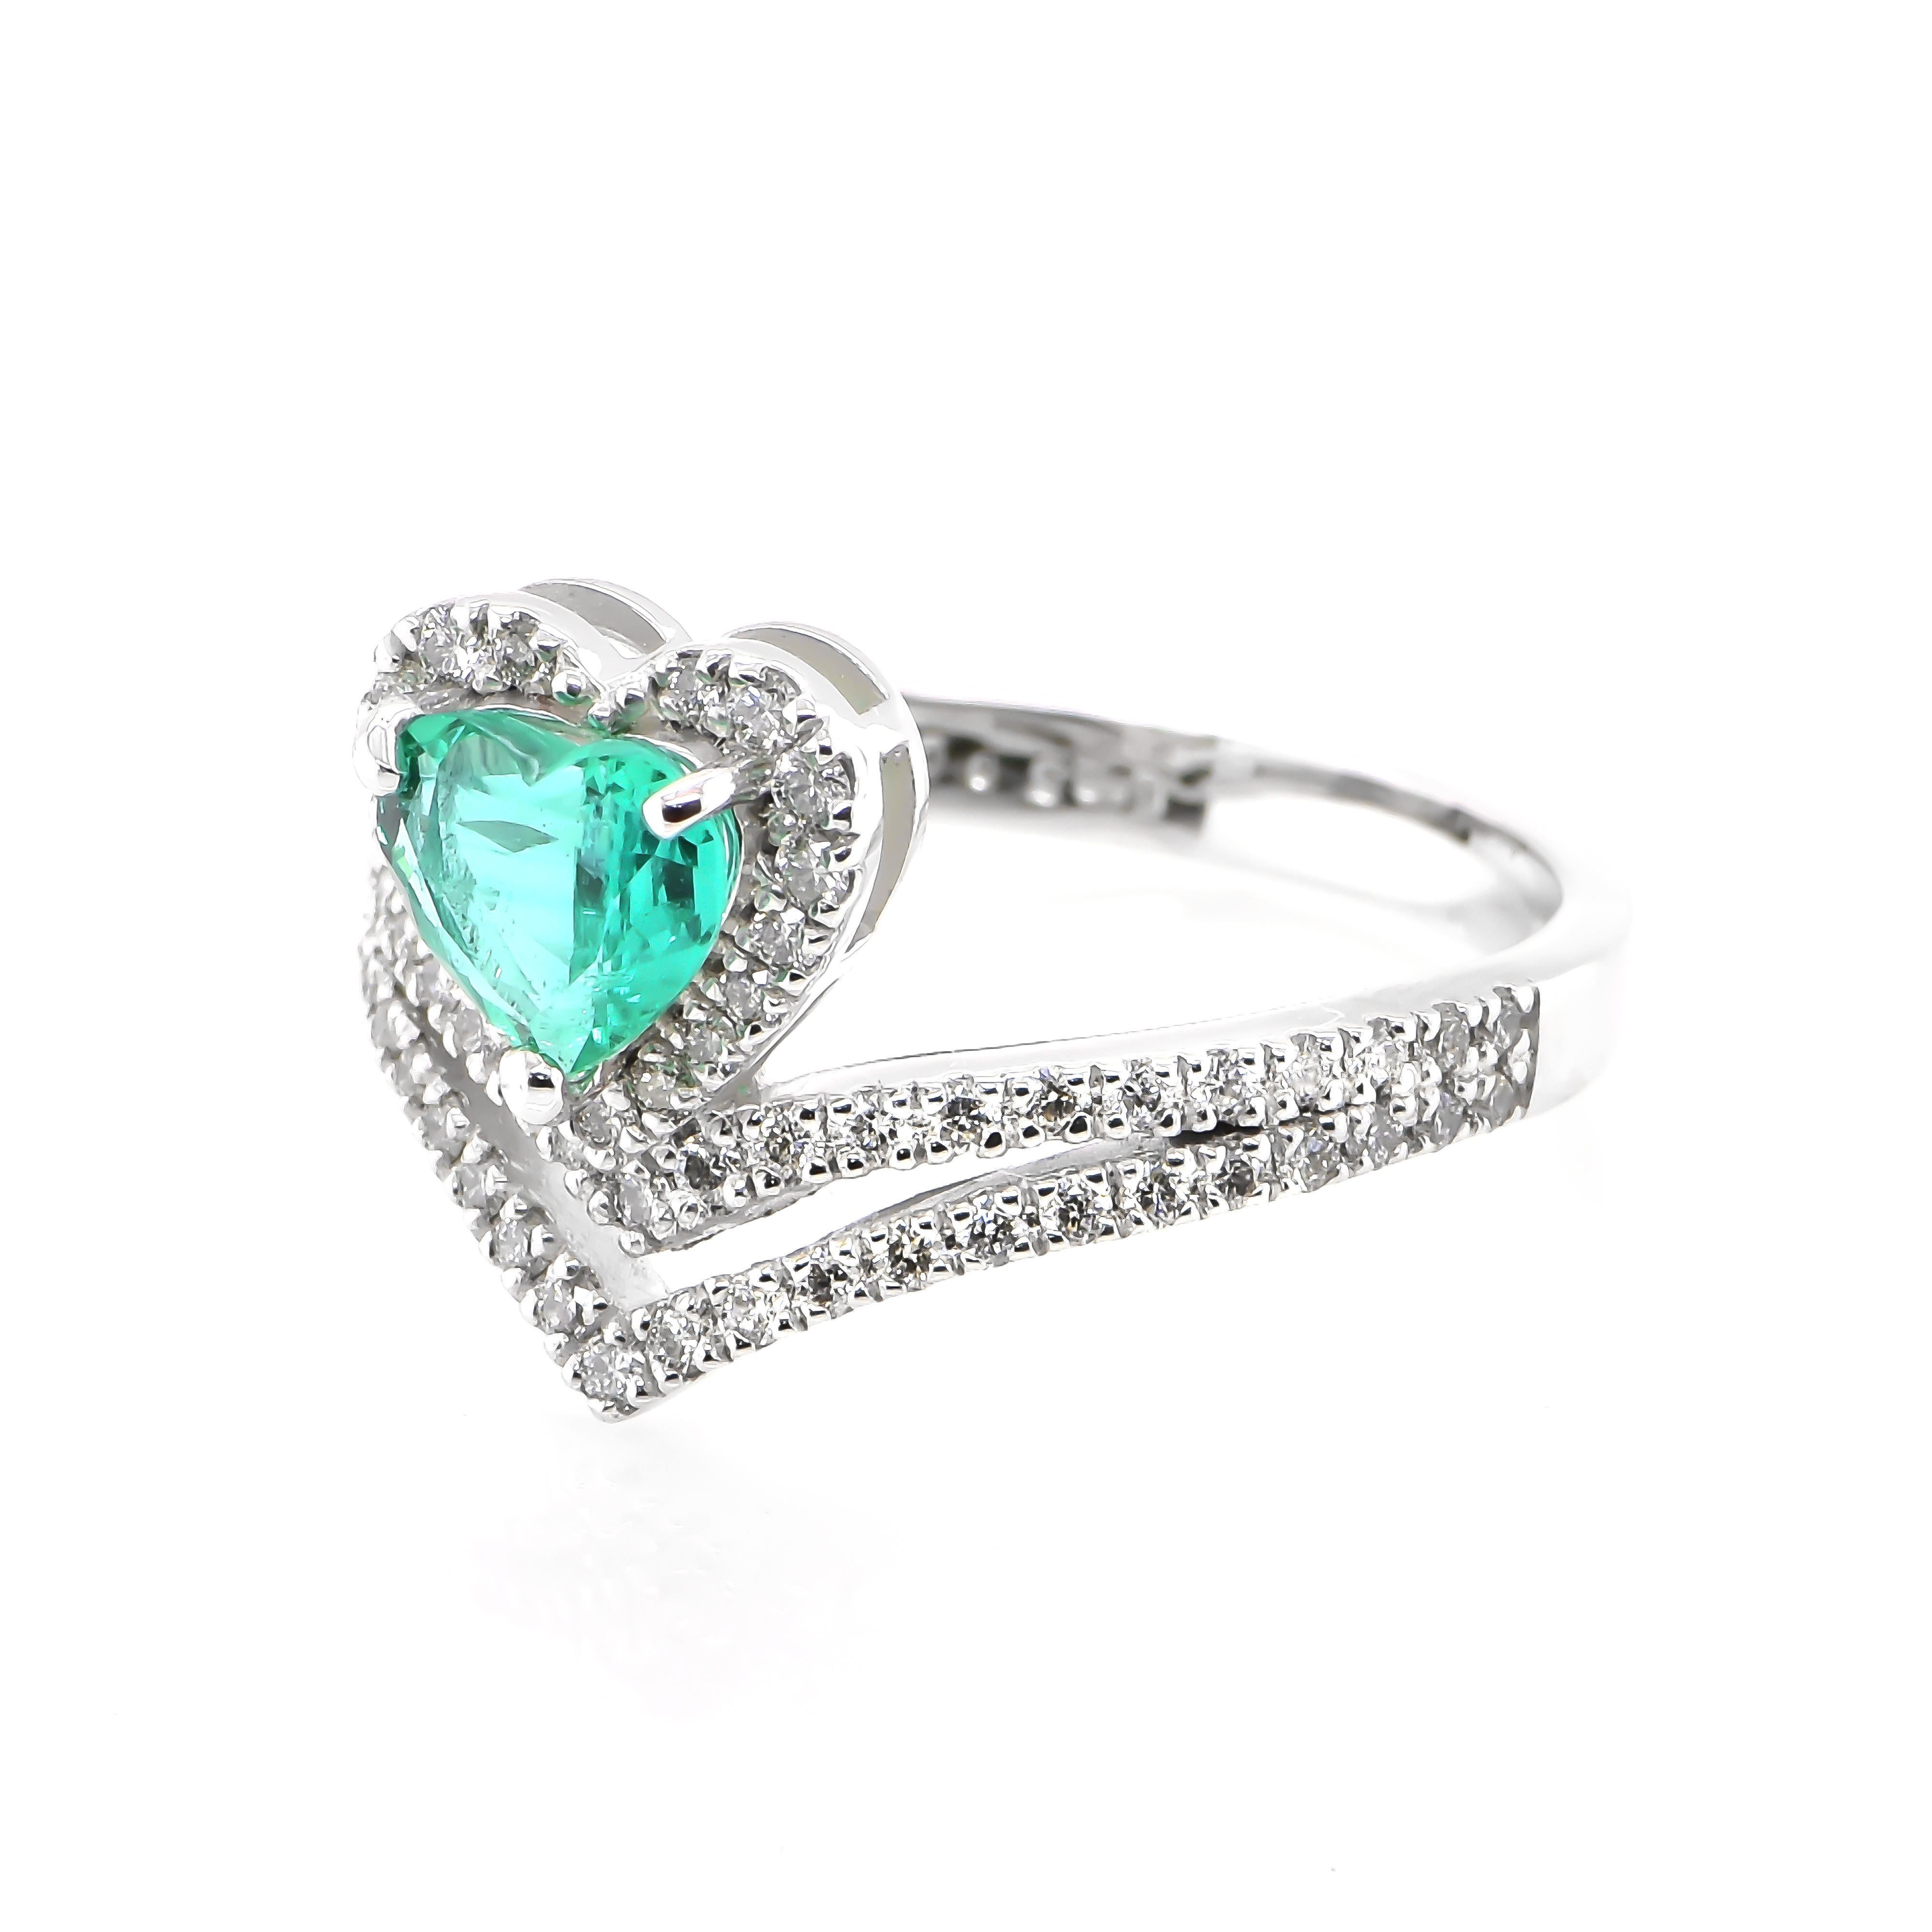 Modern 0.65 Carat Emerald and Diamond Tiara Cocktail Ring Made in Platinum For Sale